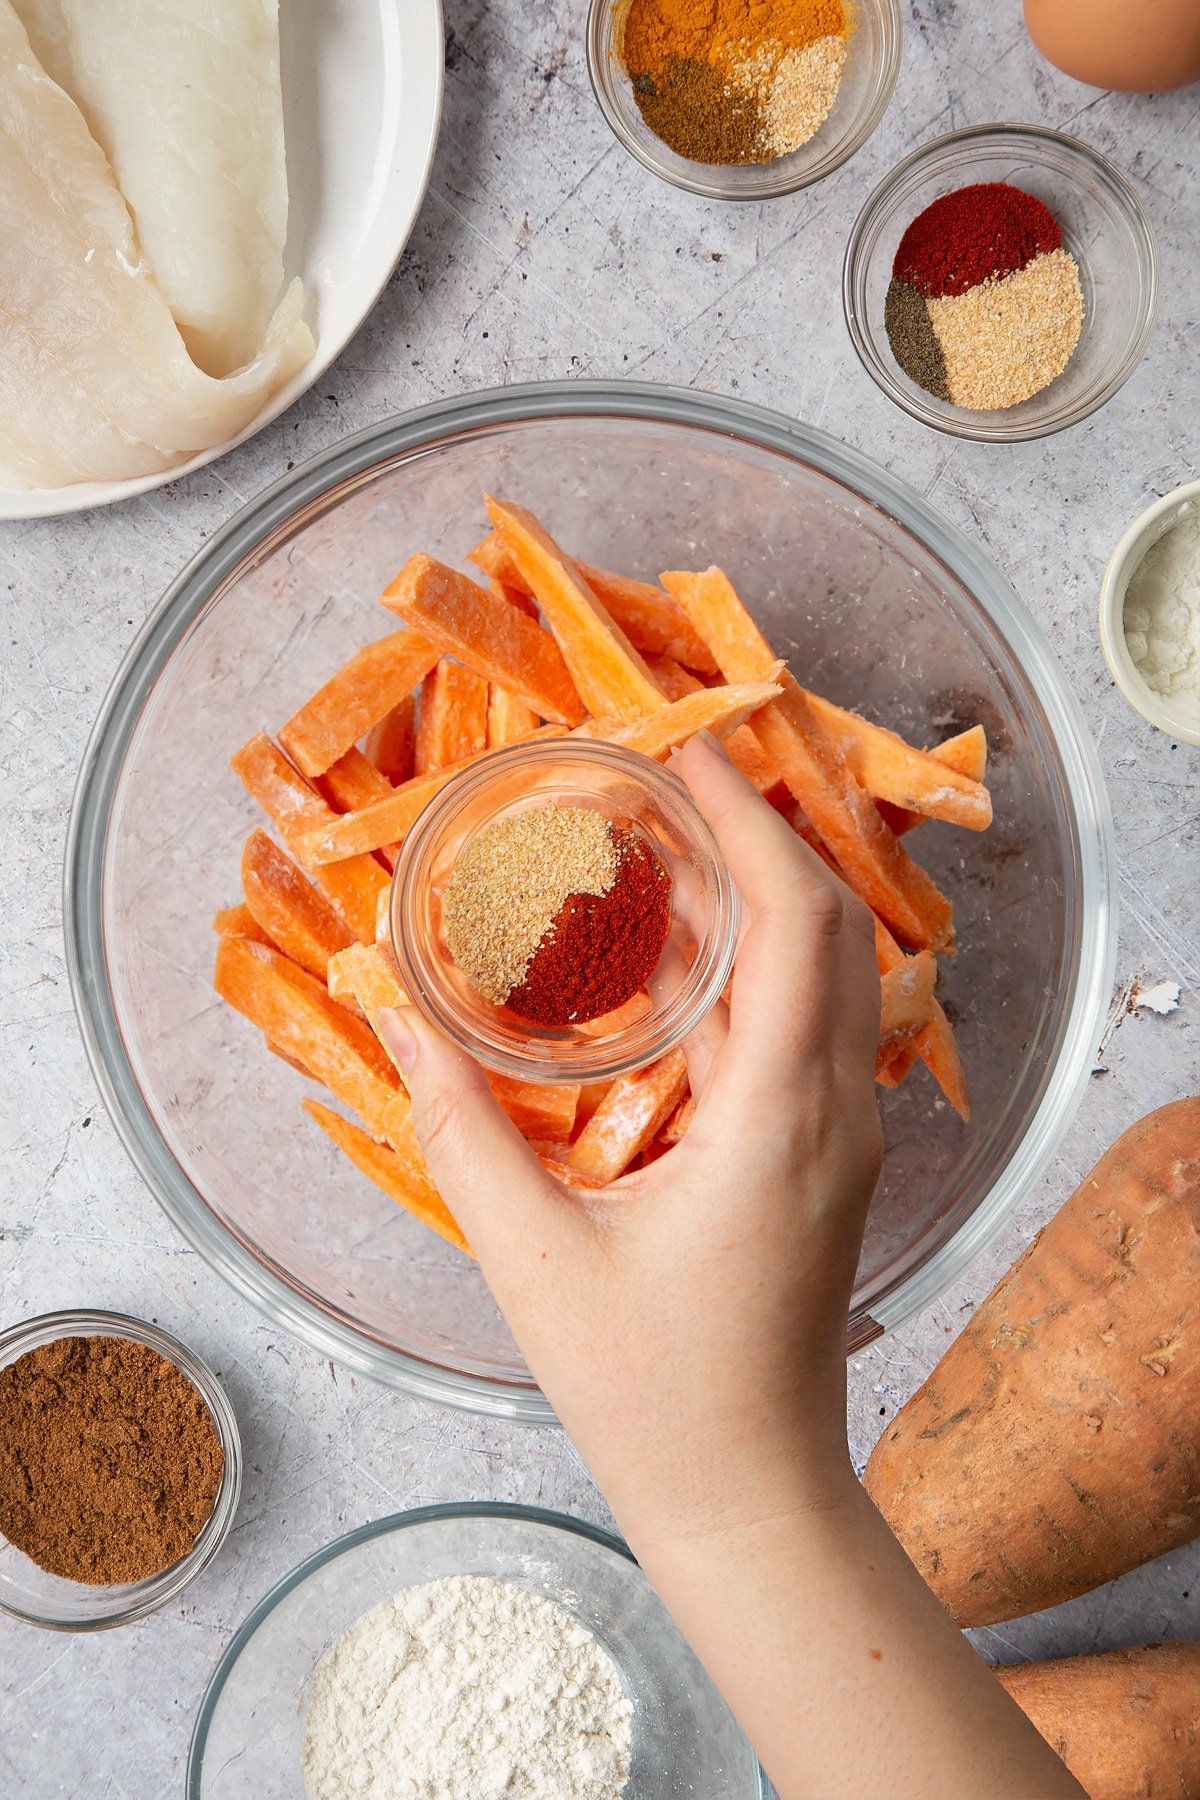 Sweet potato cut into fries and tossed in cornflour in a glass bowl. A hand holds a small bowl containing garlic granules and paprika. Surrounding the bowl is ingredients for sweet potato chips.